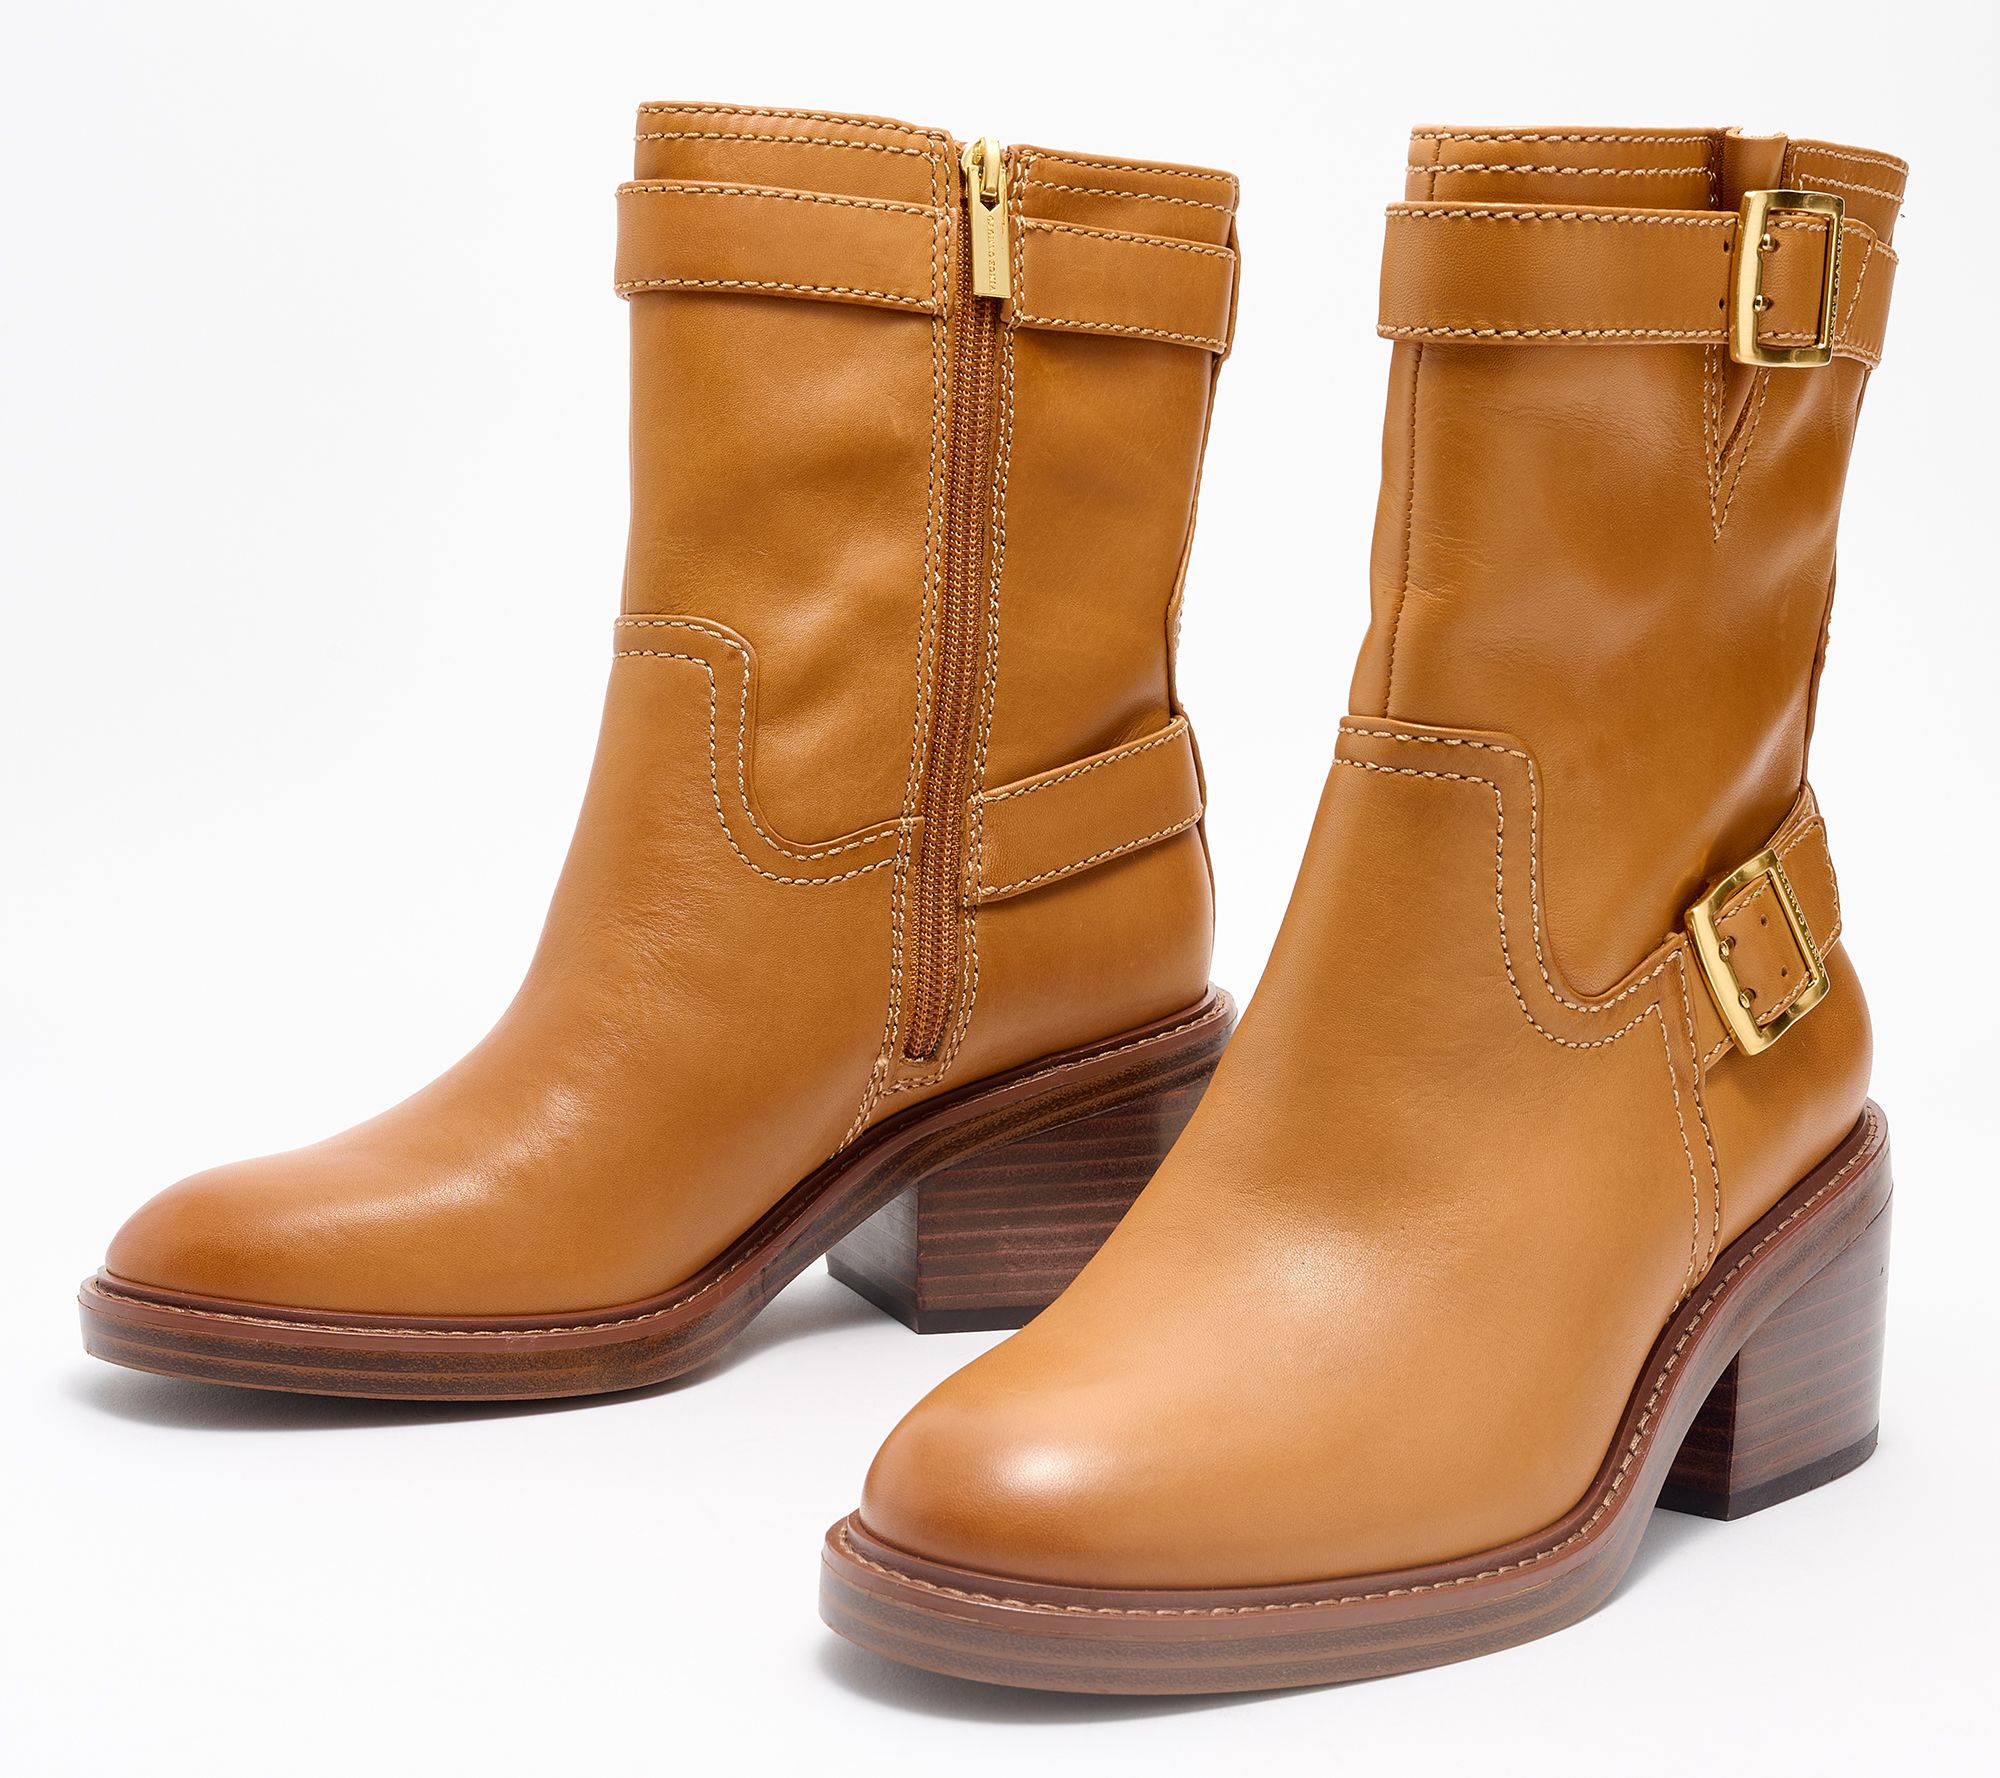 Vince Camuto Leather Buckle Moto Boot - Vergila